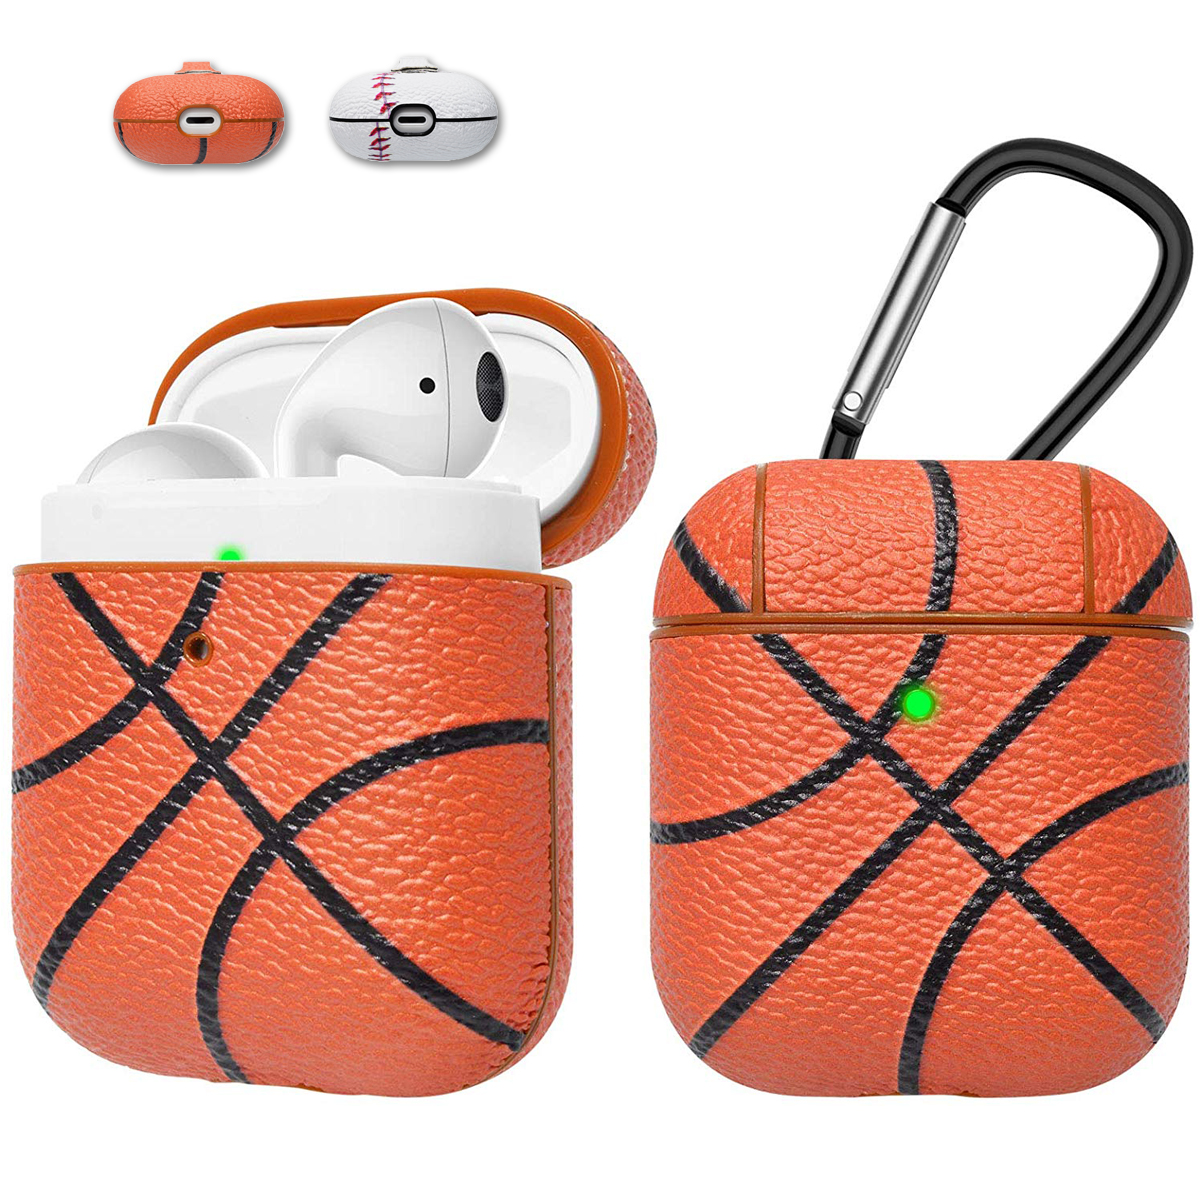 Apple Airpods Case Skin, Takfox AirPods Accessories Case for Airpods 1 & 2 Portable Protective Anti-Scratch PU Leather Cover Skin for Airpods 1 & AirPods 2 [Front LED Visible] w/ Keychain -Basketball - image 1 of 9